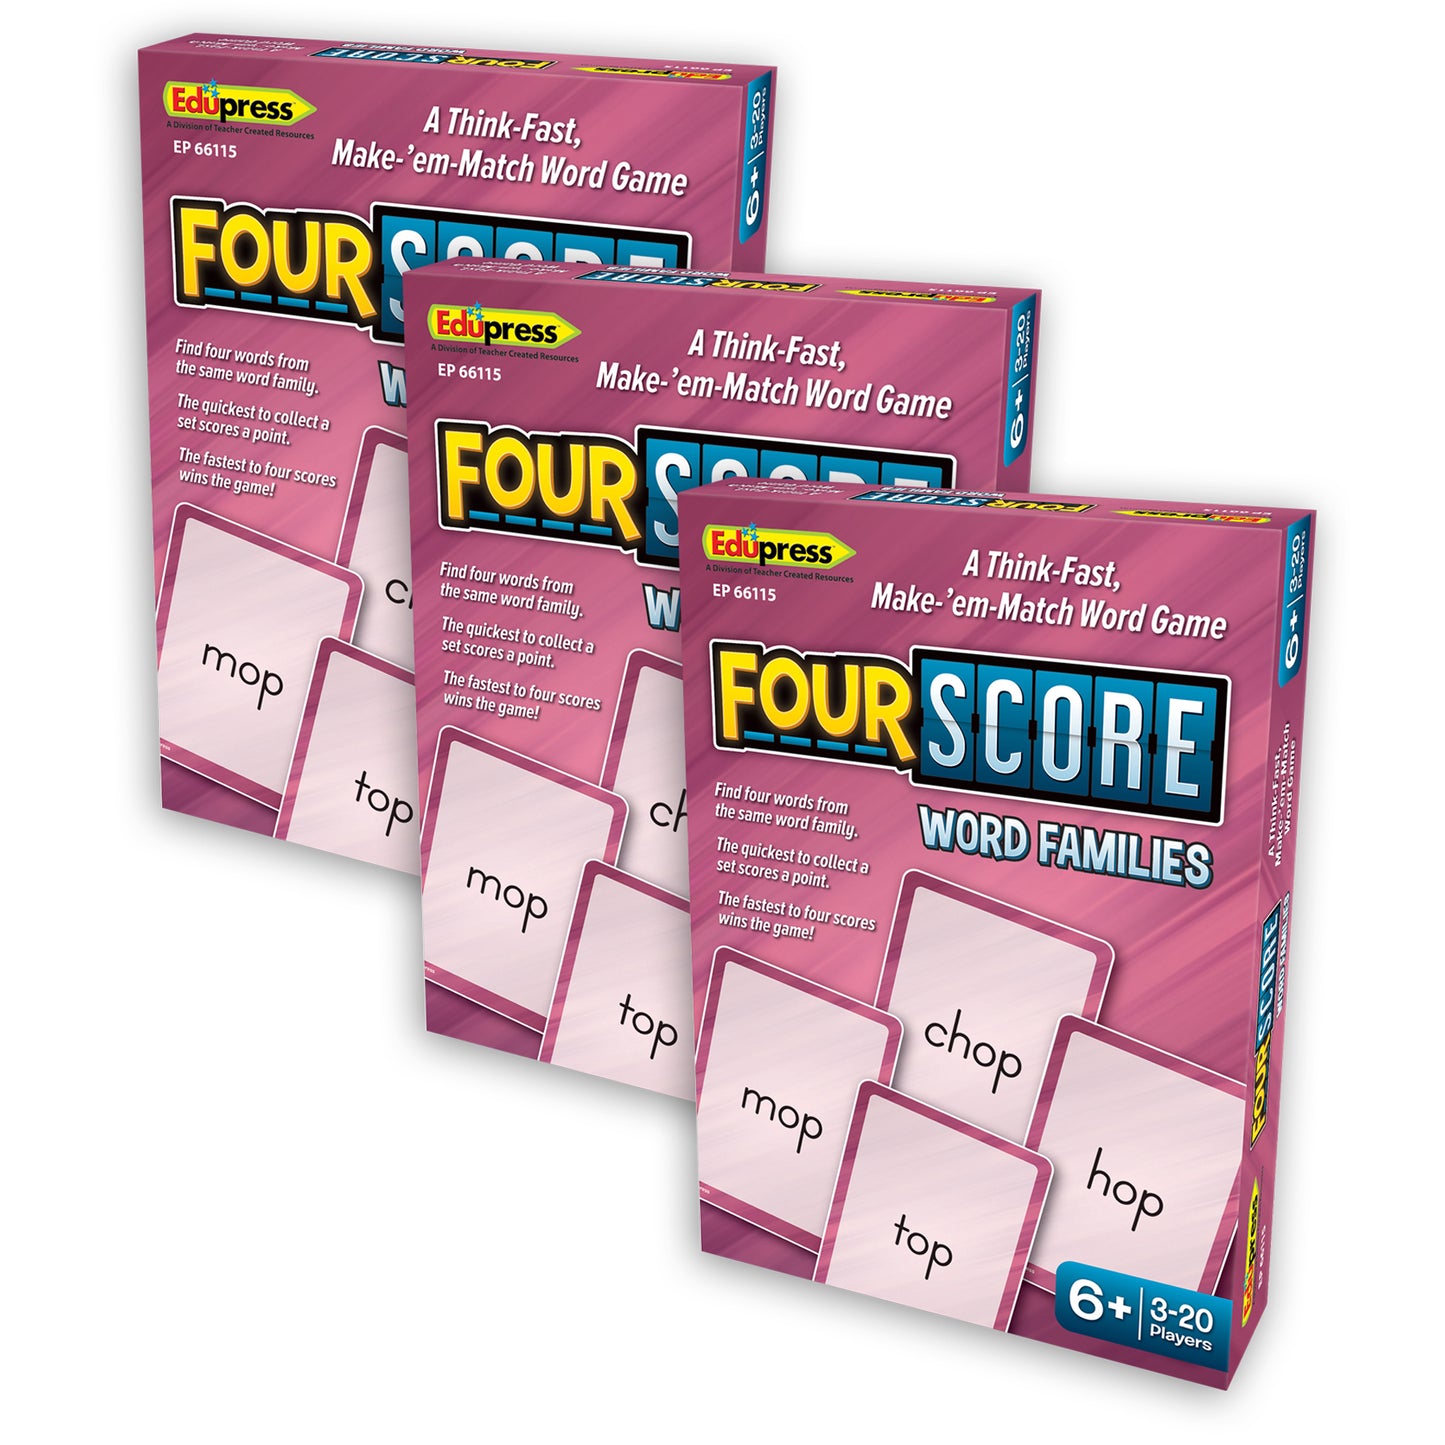 Four Score Card Game: Word Families, Pack of 3